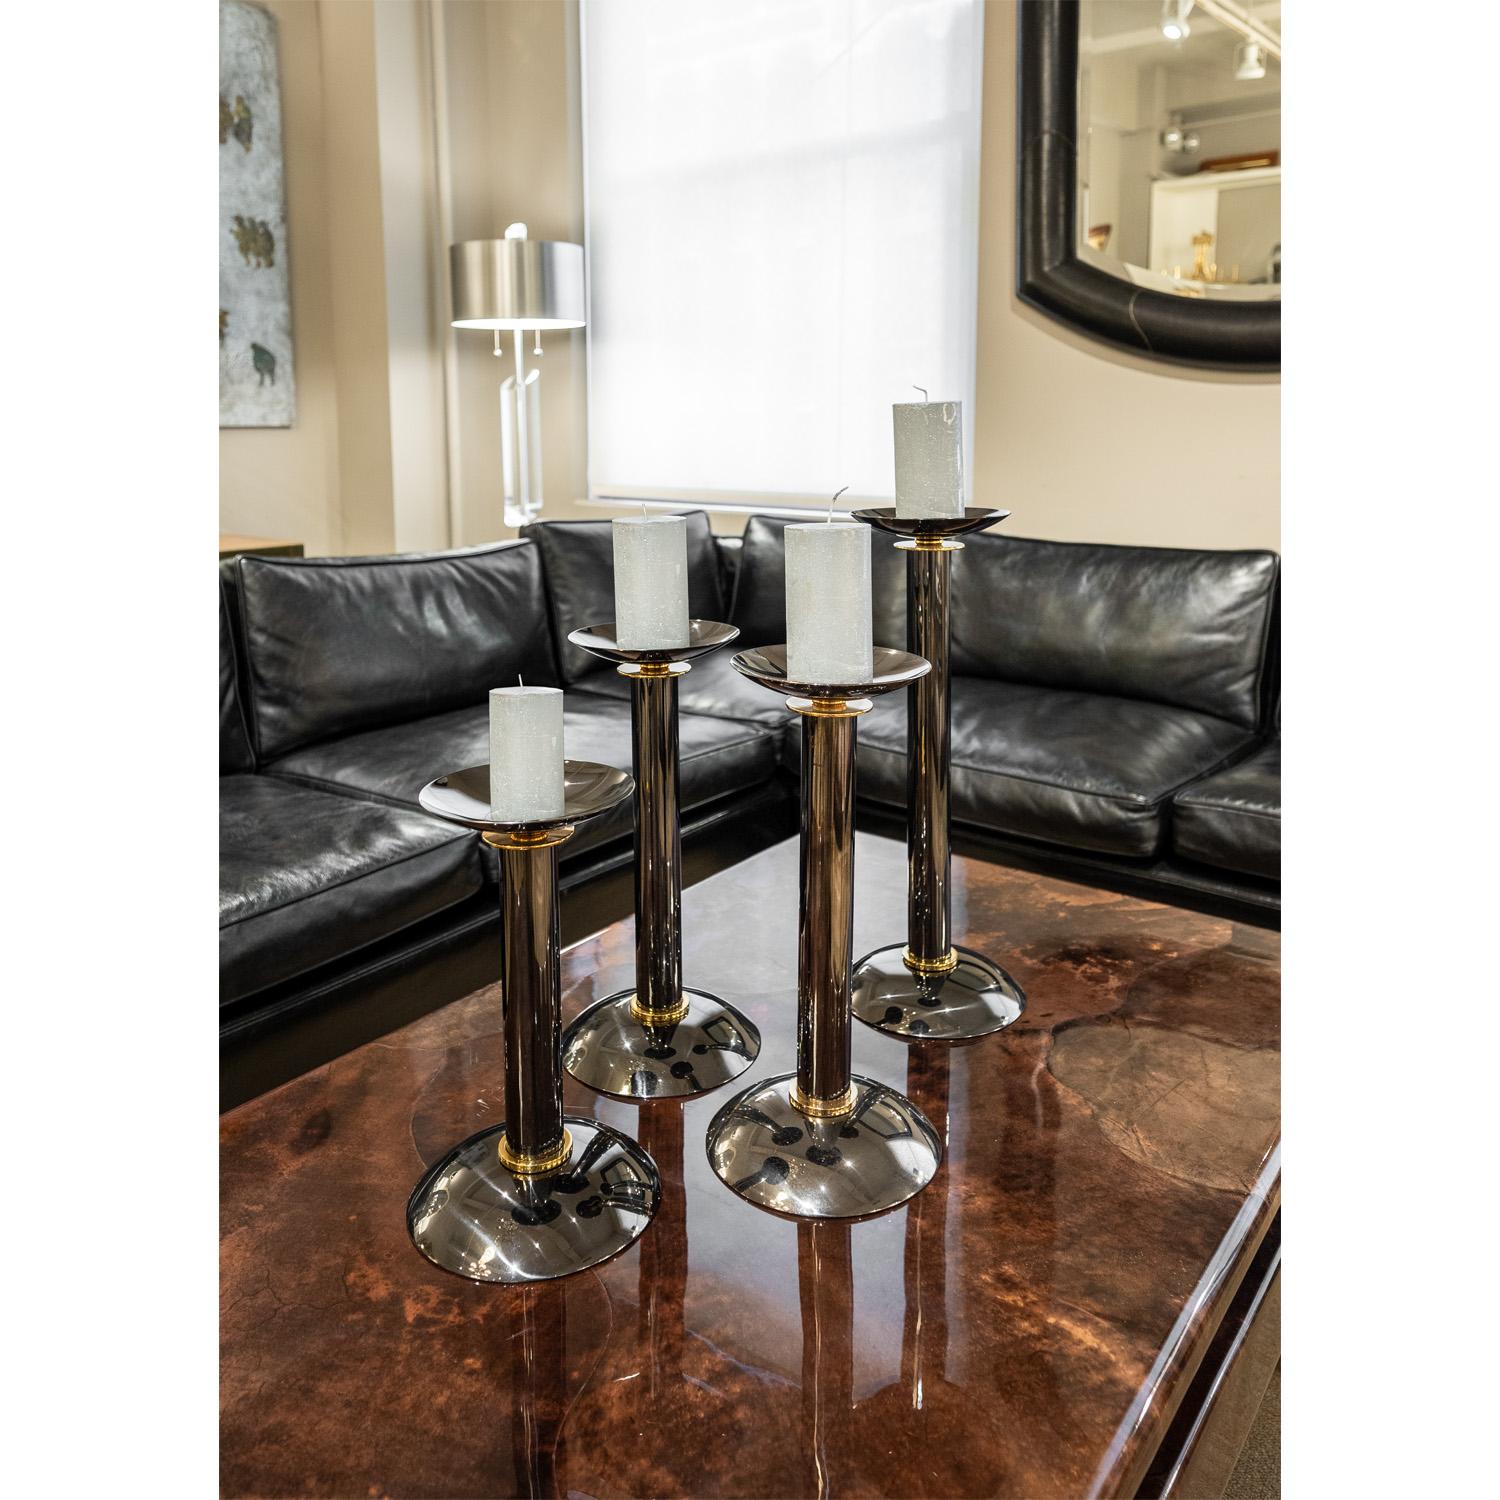 Karl Springer Set of 4 Candleholders in Gunmetal and Brass, 1980s In Excellent Condition For Sale In New York, NY